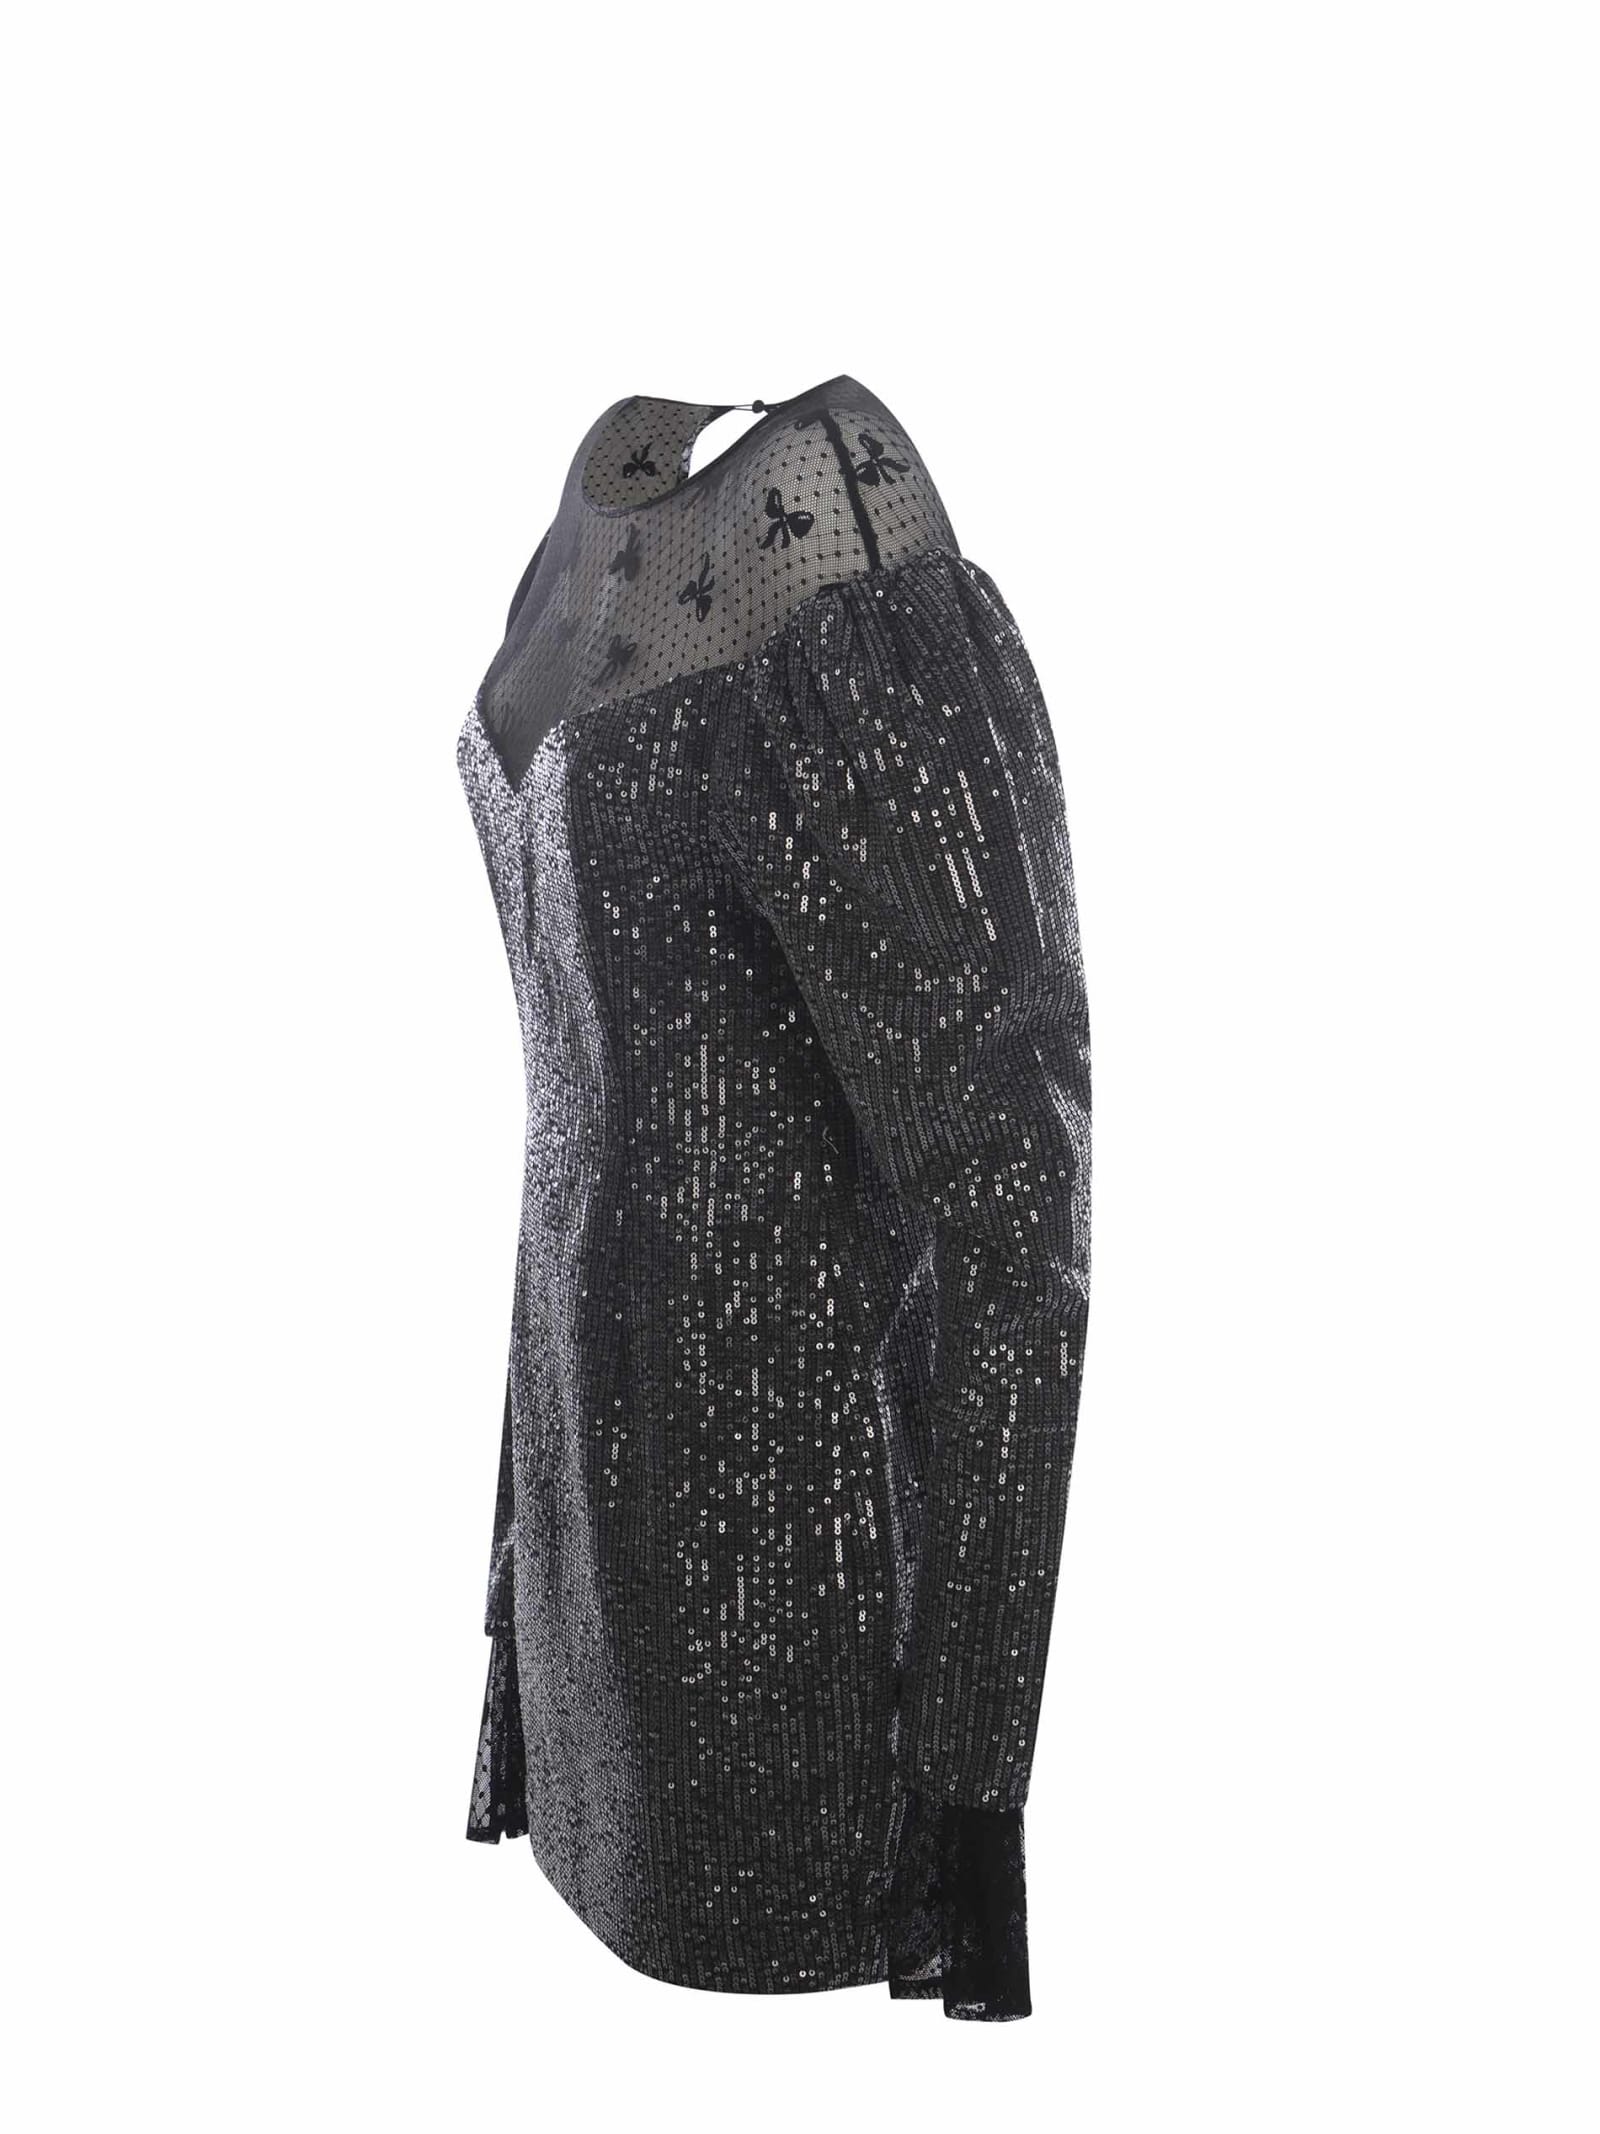 Shop Rotate Birger Christensen Dress Rotate Sequins Made Of Twill In Black